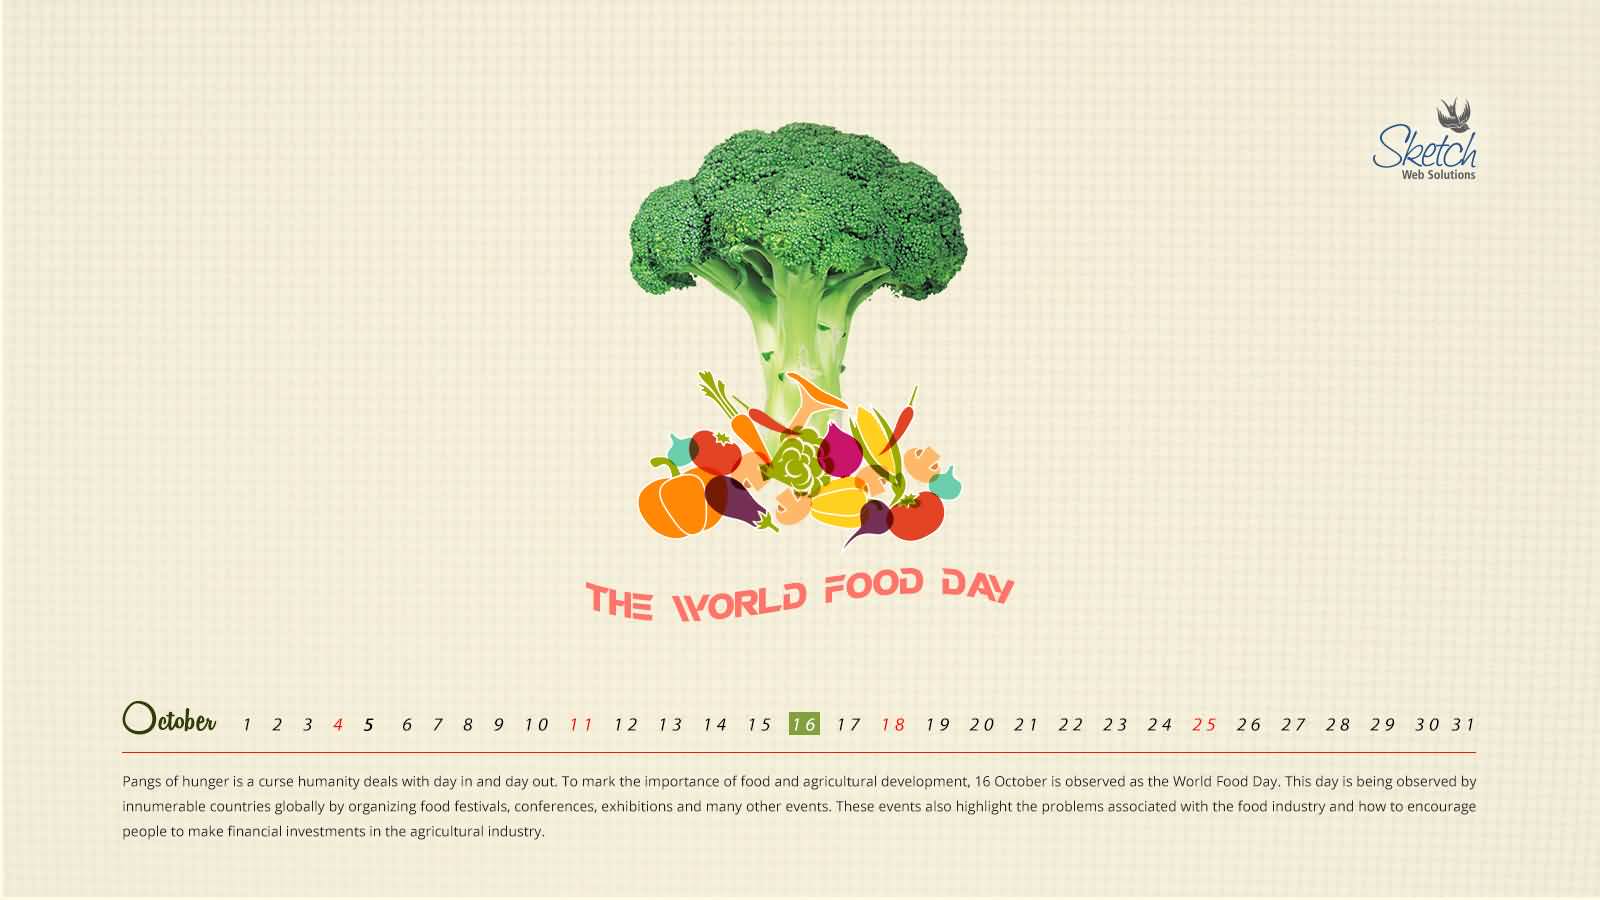 Beautiful Picture Of World Food Day Wishes 2016